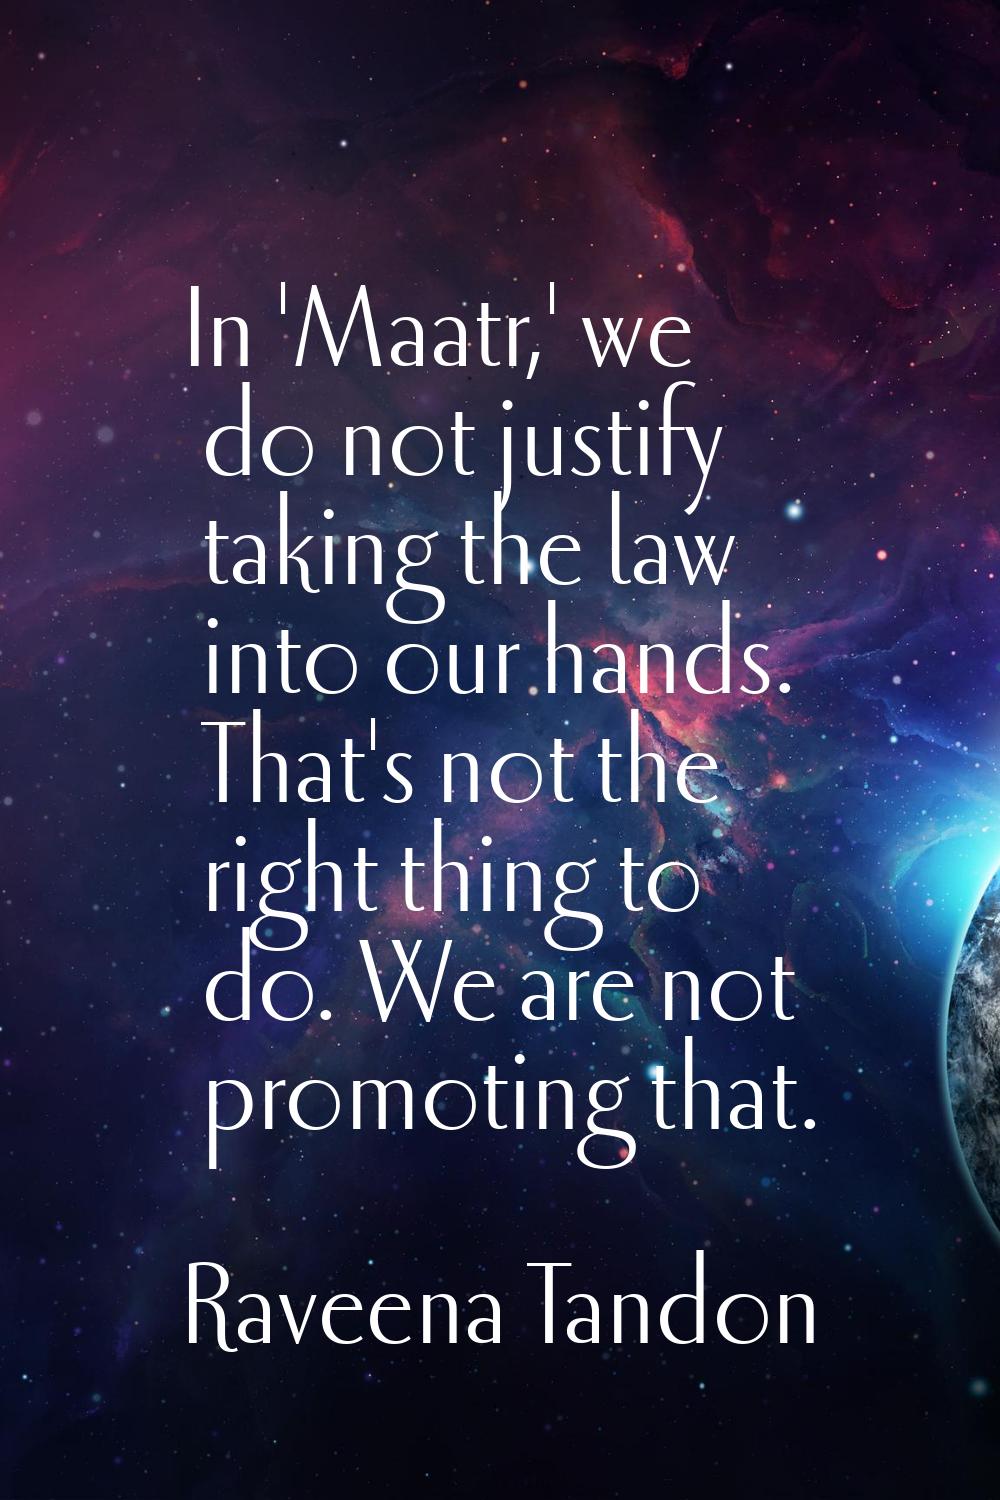 In 'Maatr,' we do not justify taking the law into our hands. That's not the right thing to do. We a